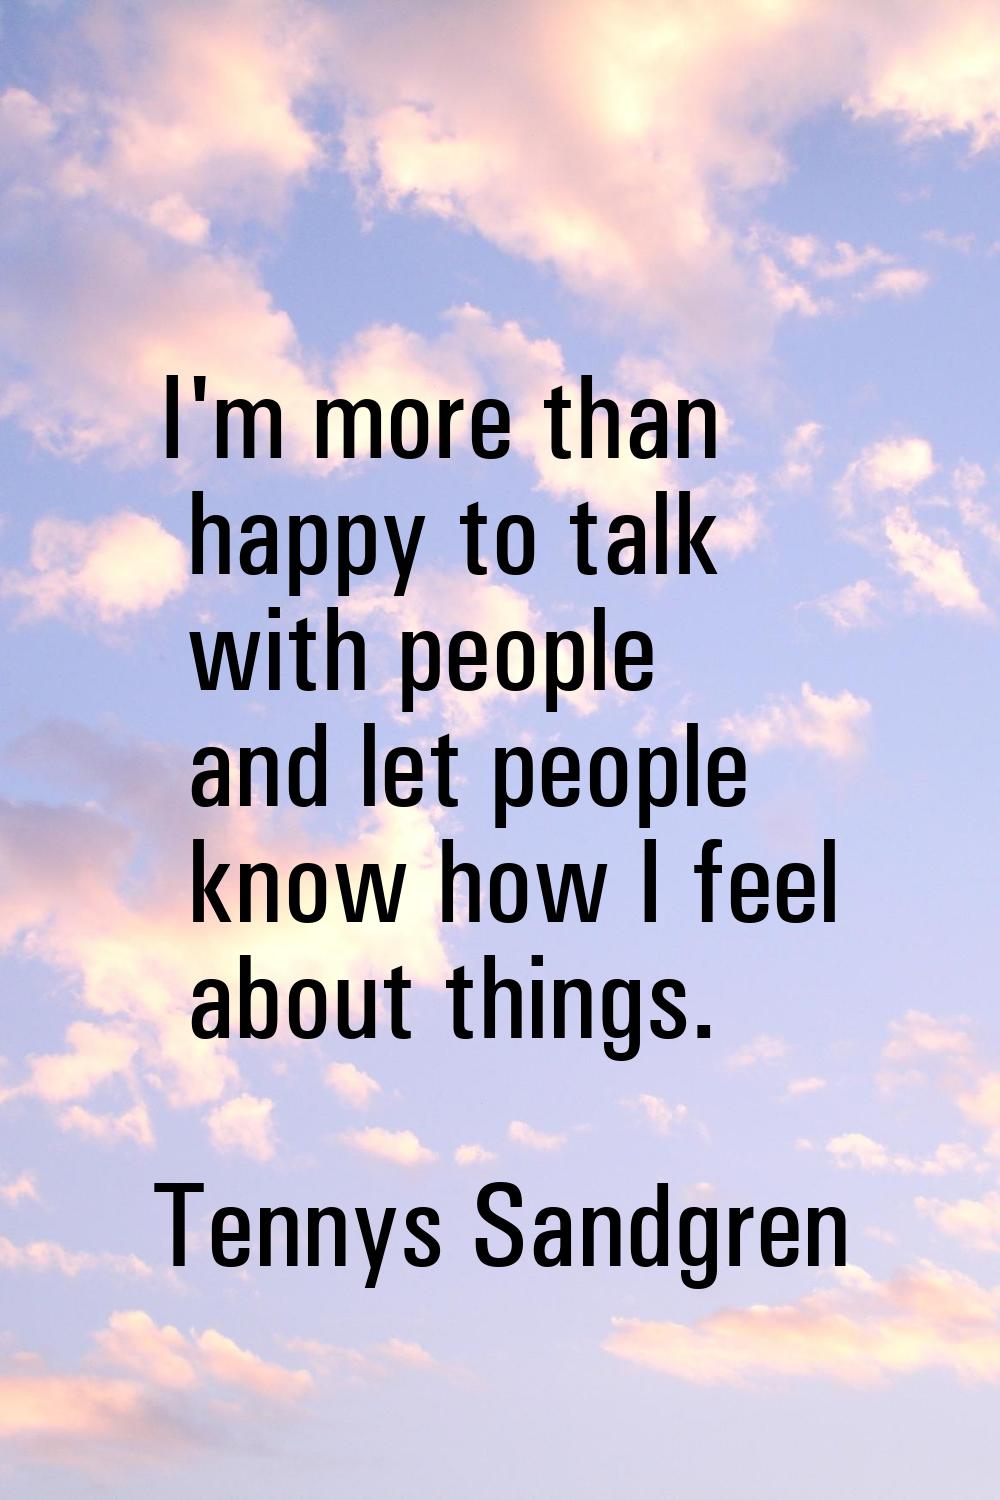 I'm more than happy to talk with people and let people know how I feel about things.